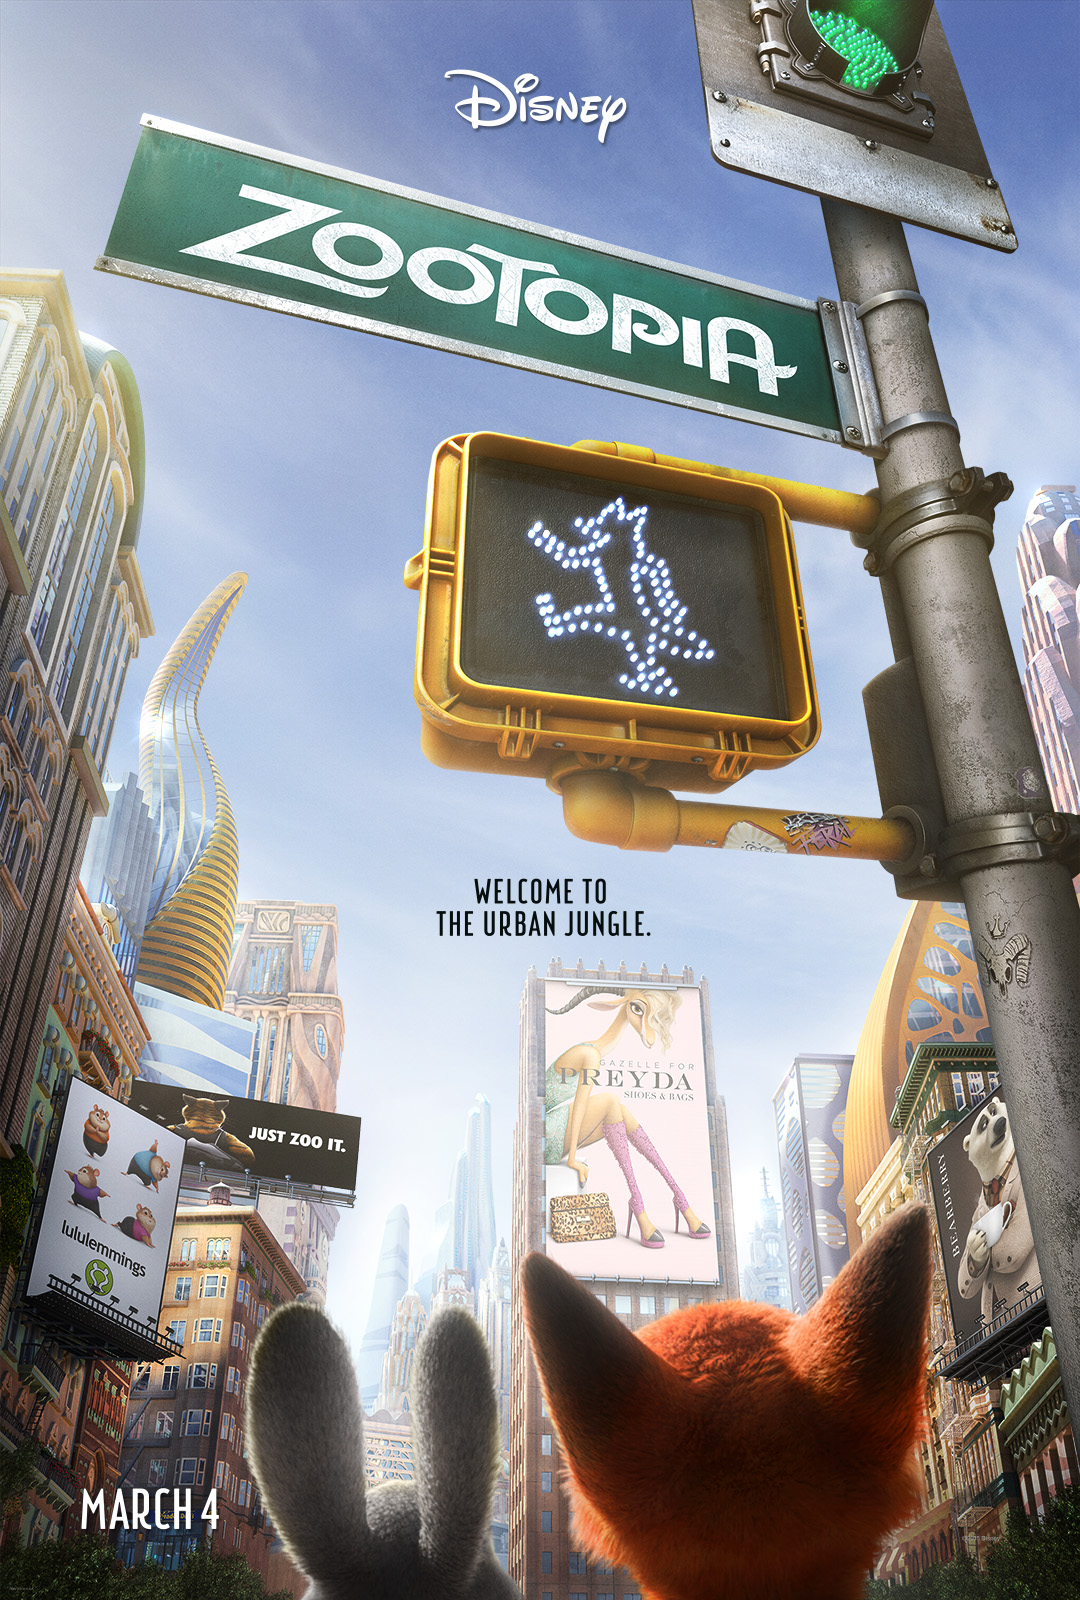 Disney Releases New Poster for ‘Zootopia’